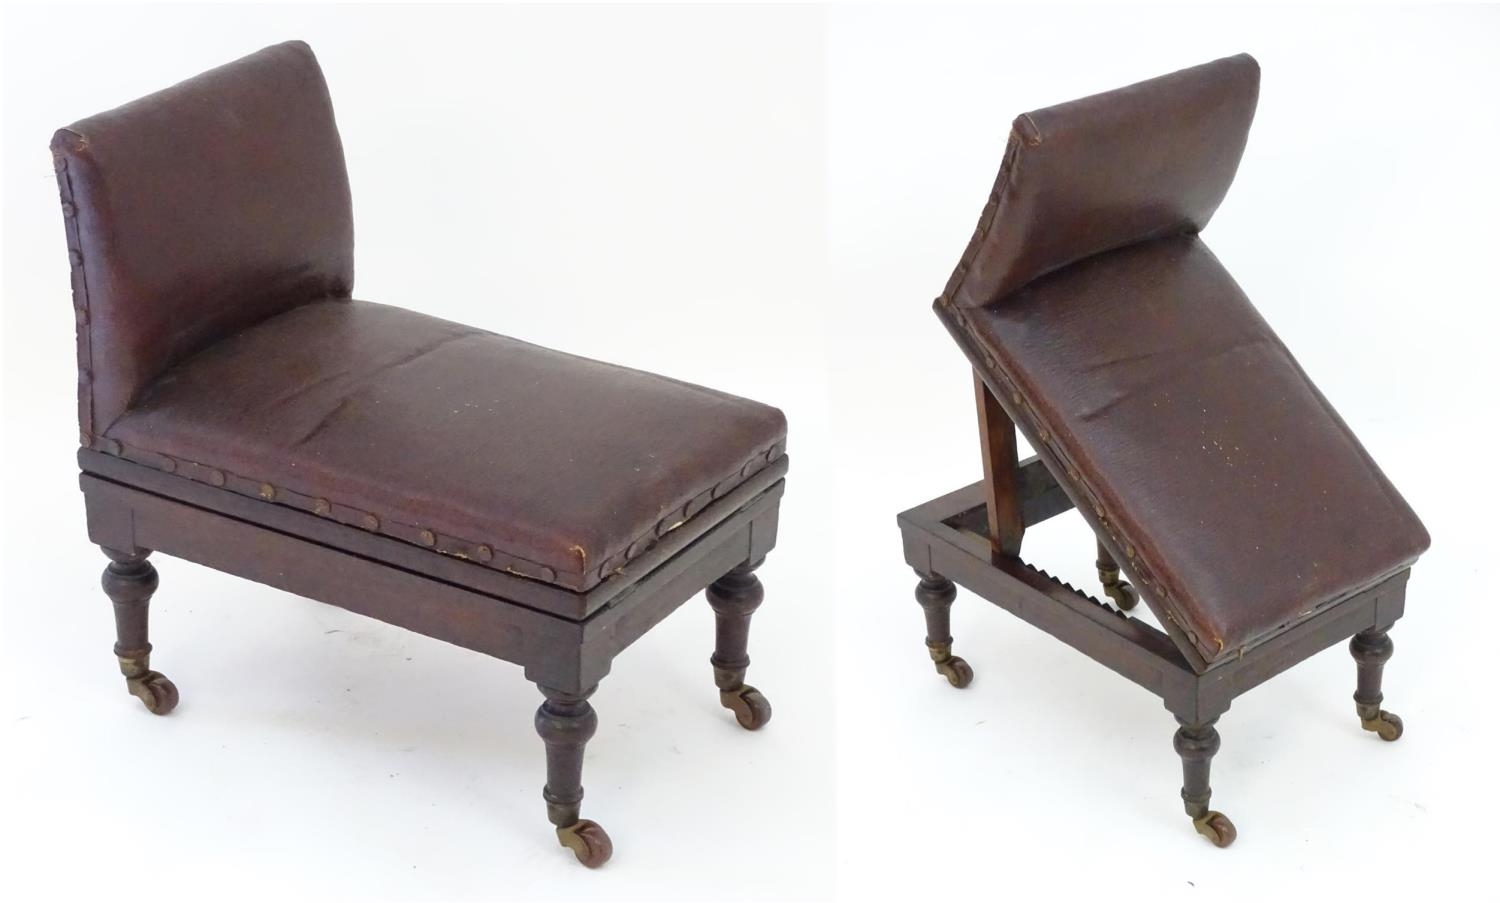 A late 19thC mahogany adjustable gout stool with leather upholstery and studded detailing,